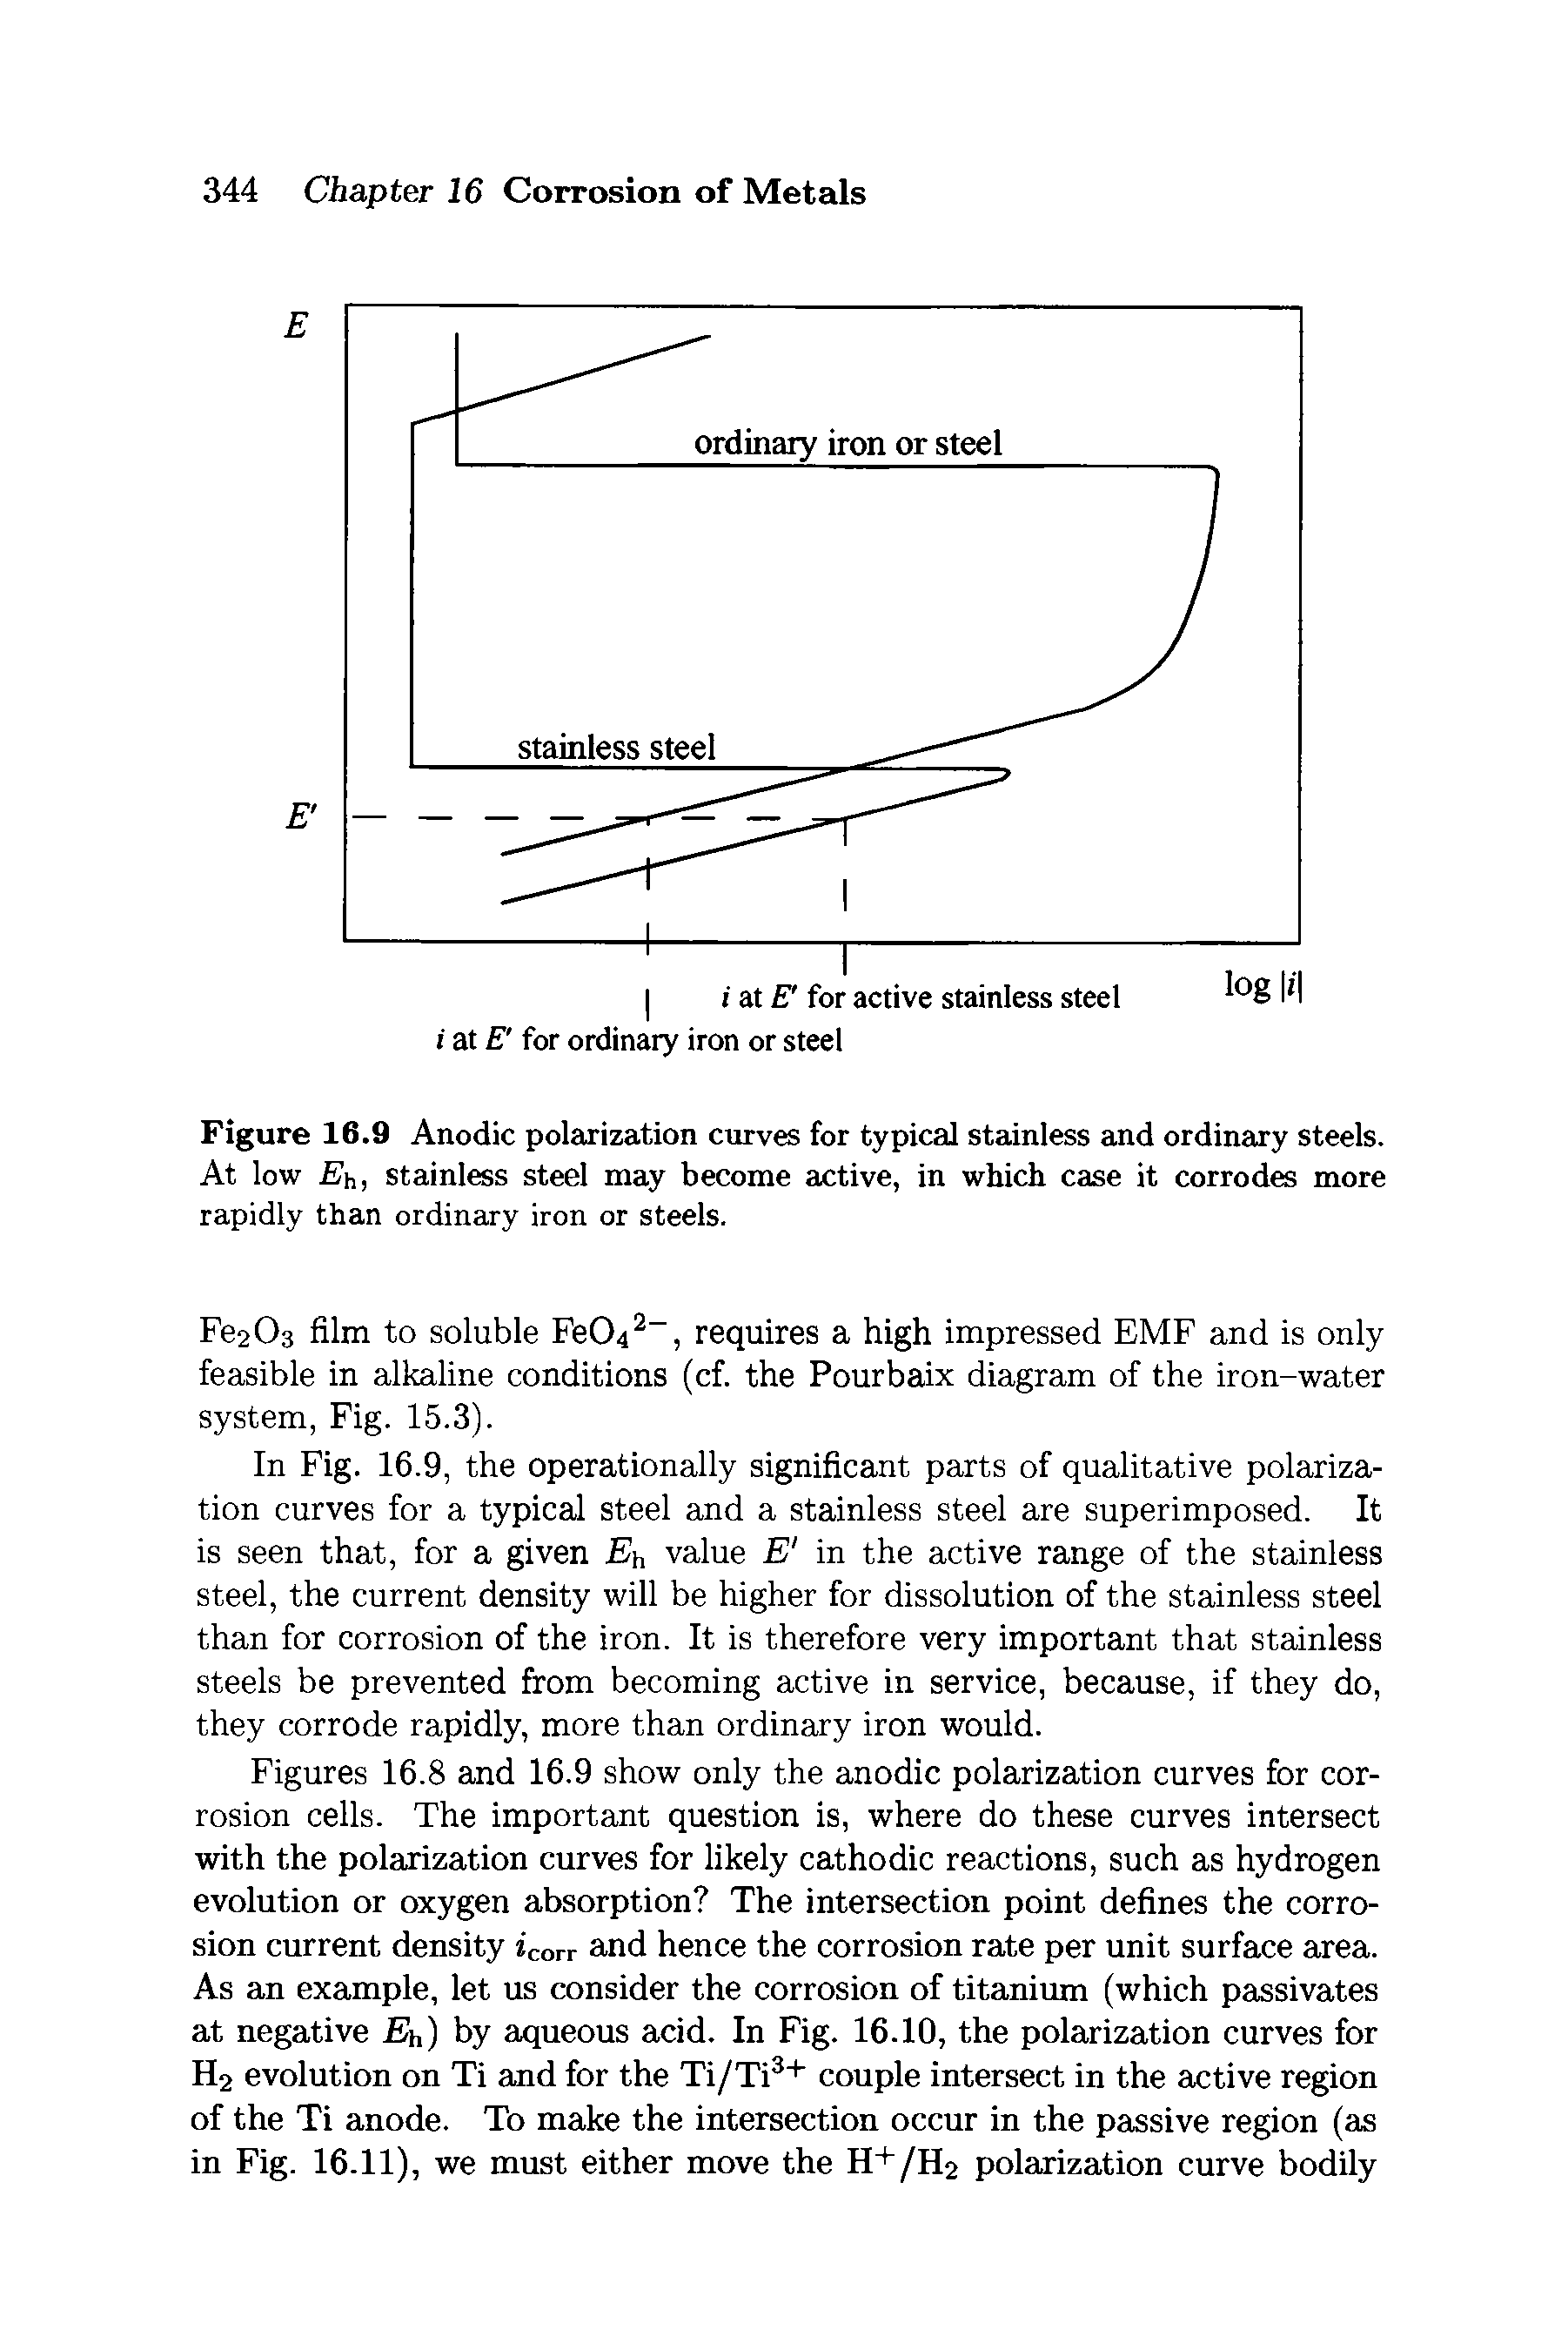 Figures 16.8 and 16.9 show only the anodic polarization curves for corrosion cells. The important question is, where do these curves intersect with the polarization curves for likely cathodic reactions, such as hydrogen evolution or oxygen absorption The intersection point defines the corrosion current density icorr and hence the corrosion rate per unit surface area. As an example, let us consider the corrosion of titanium (which passivates at negative Eh) by aqueous acid. In Fig. 16.10, the polarization curves for H2 evolution on Ti and for the Ti/Ti3+ couple intersect in the active region of the Ti anode. To make the intersection occur in the passive region (as in Fig. 16.11), we must either move the H+/H2 polarization curve bodily...